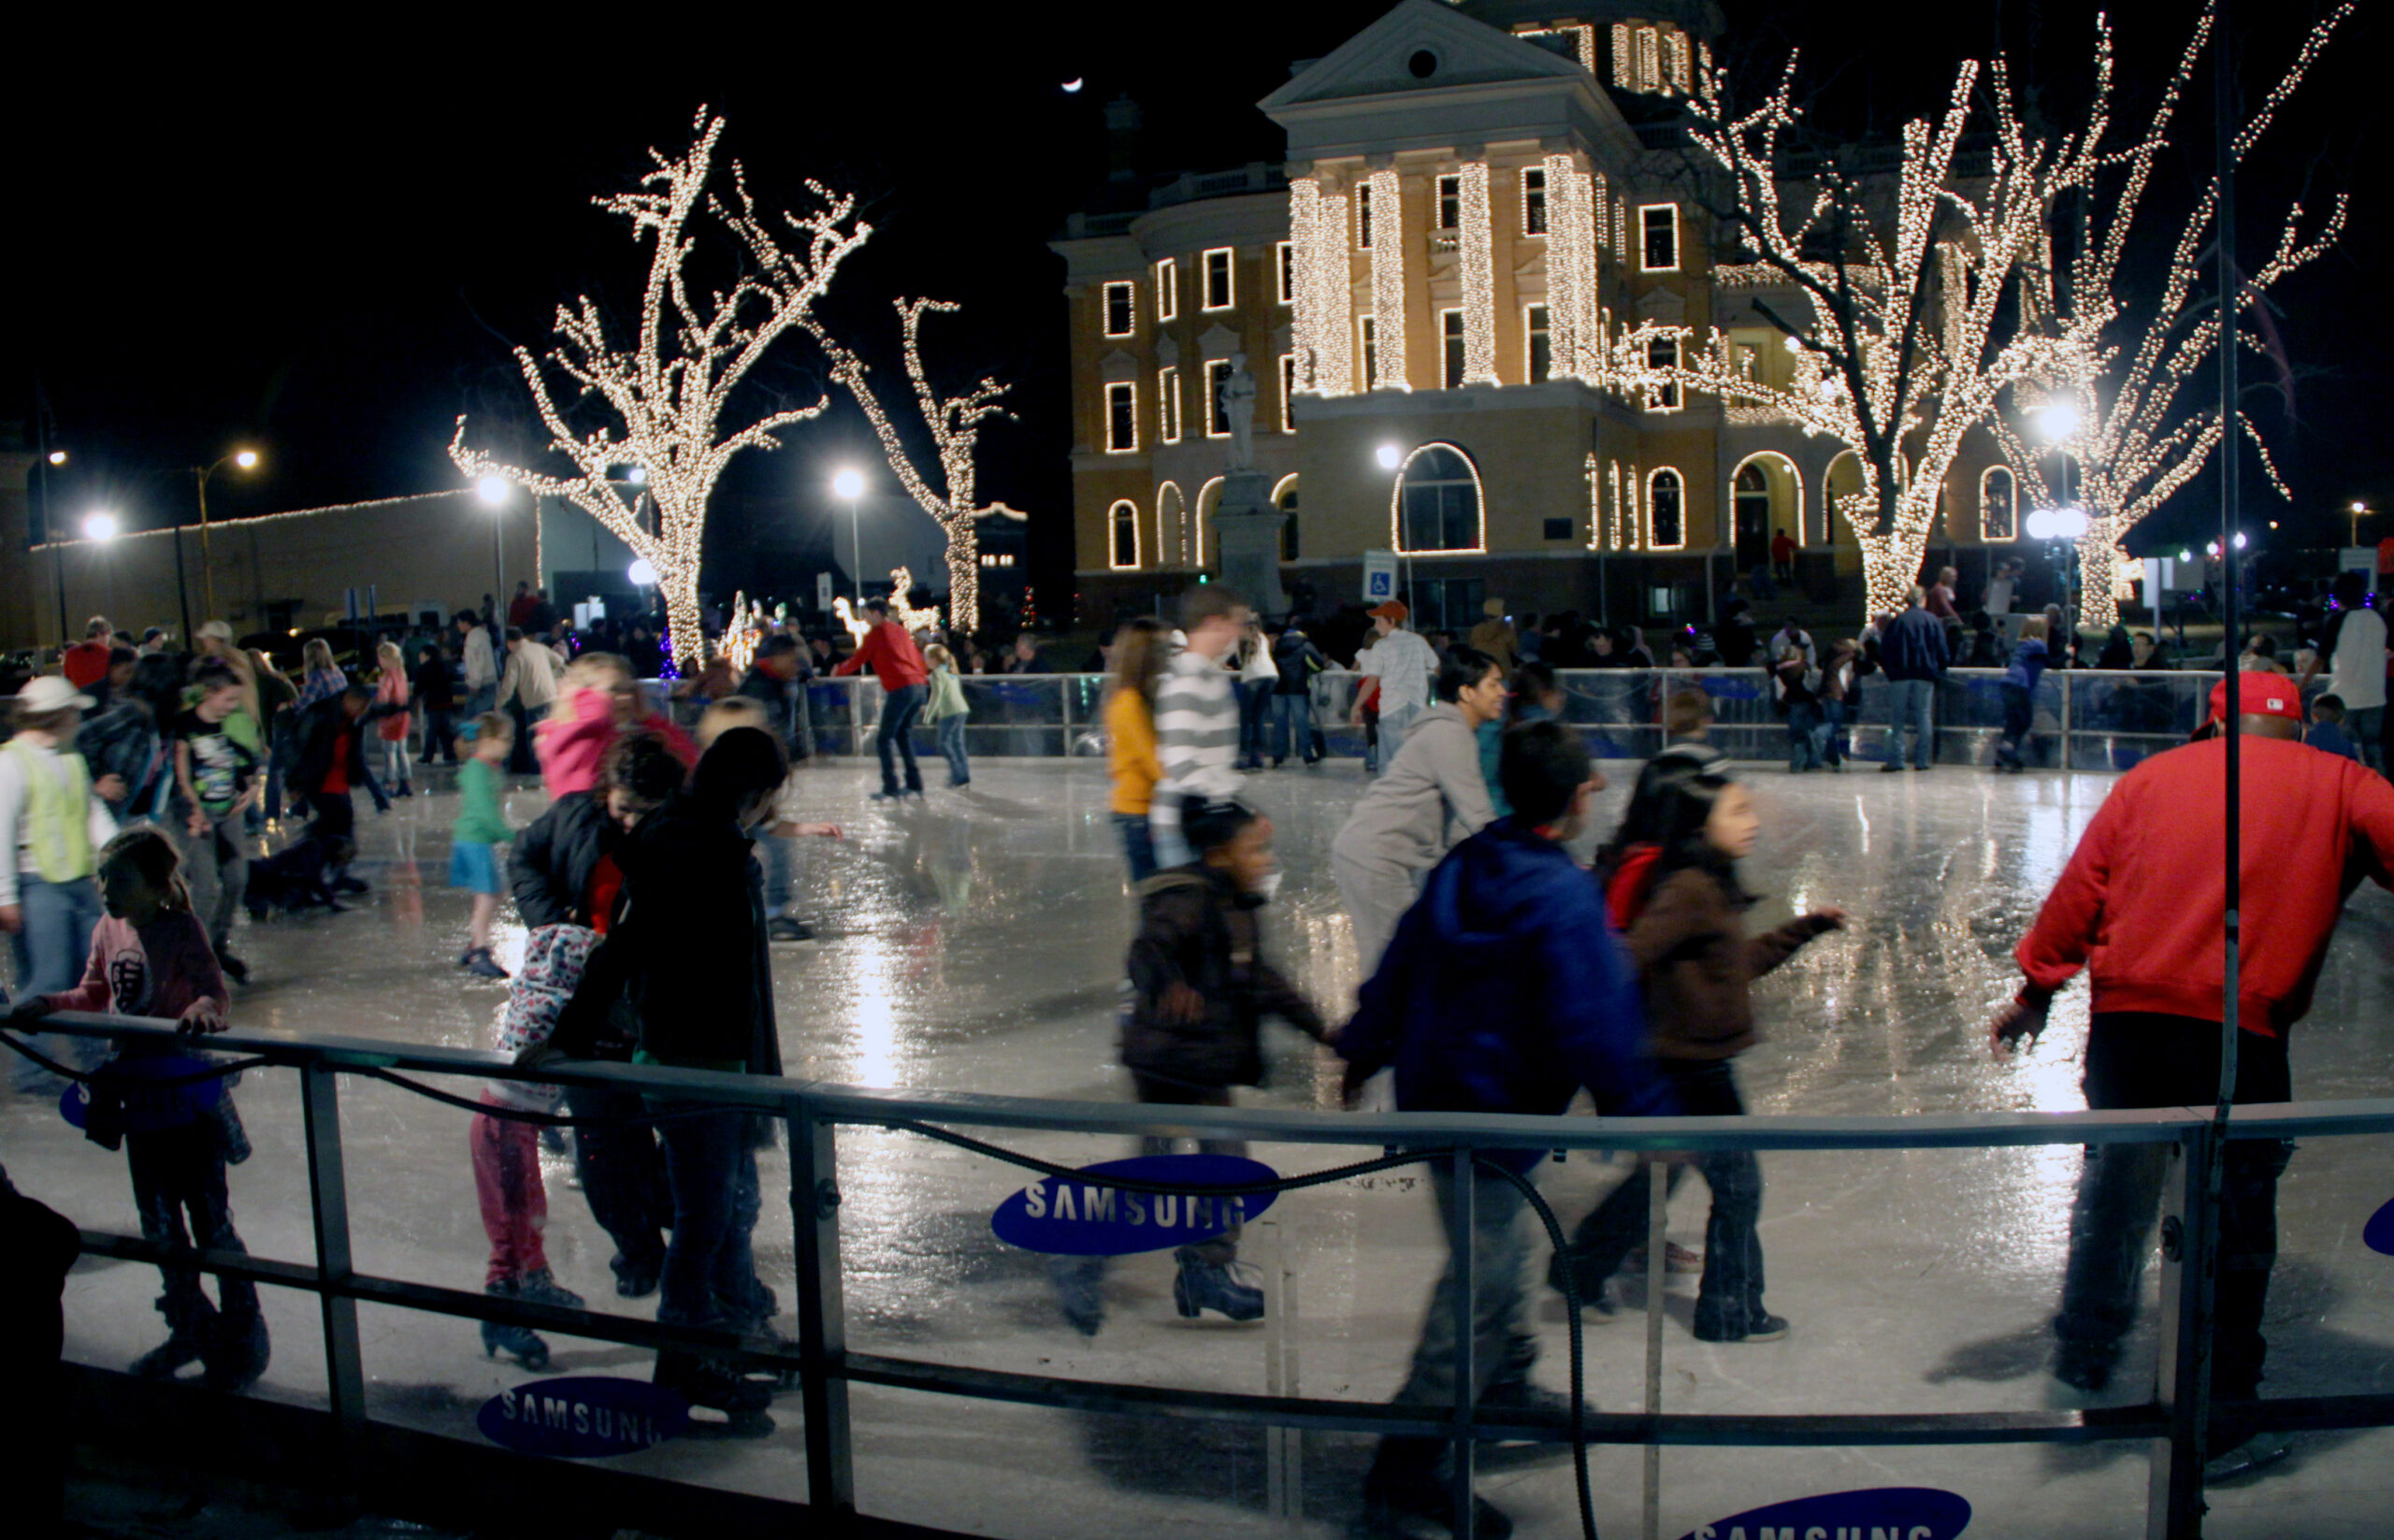 The ice rink in Marshall, TX